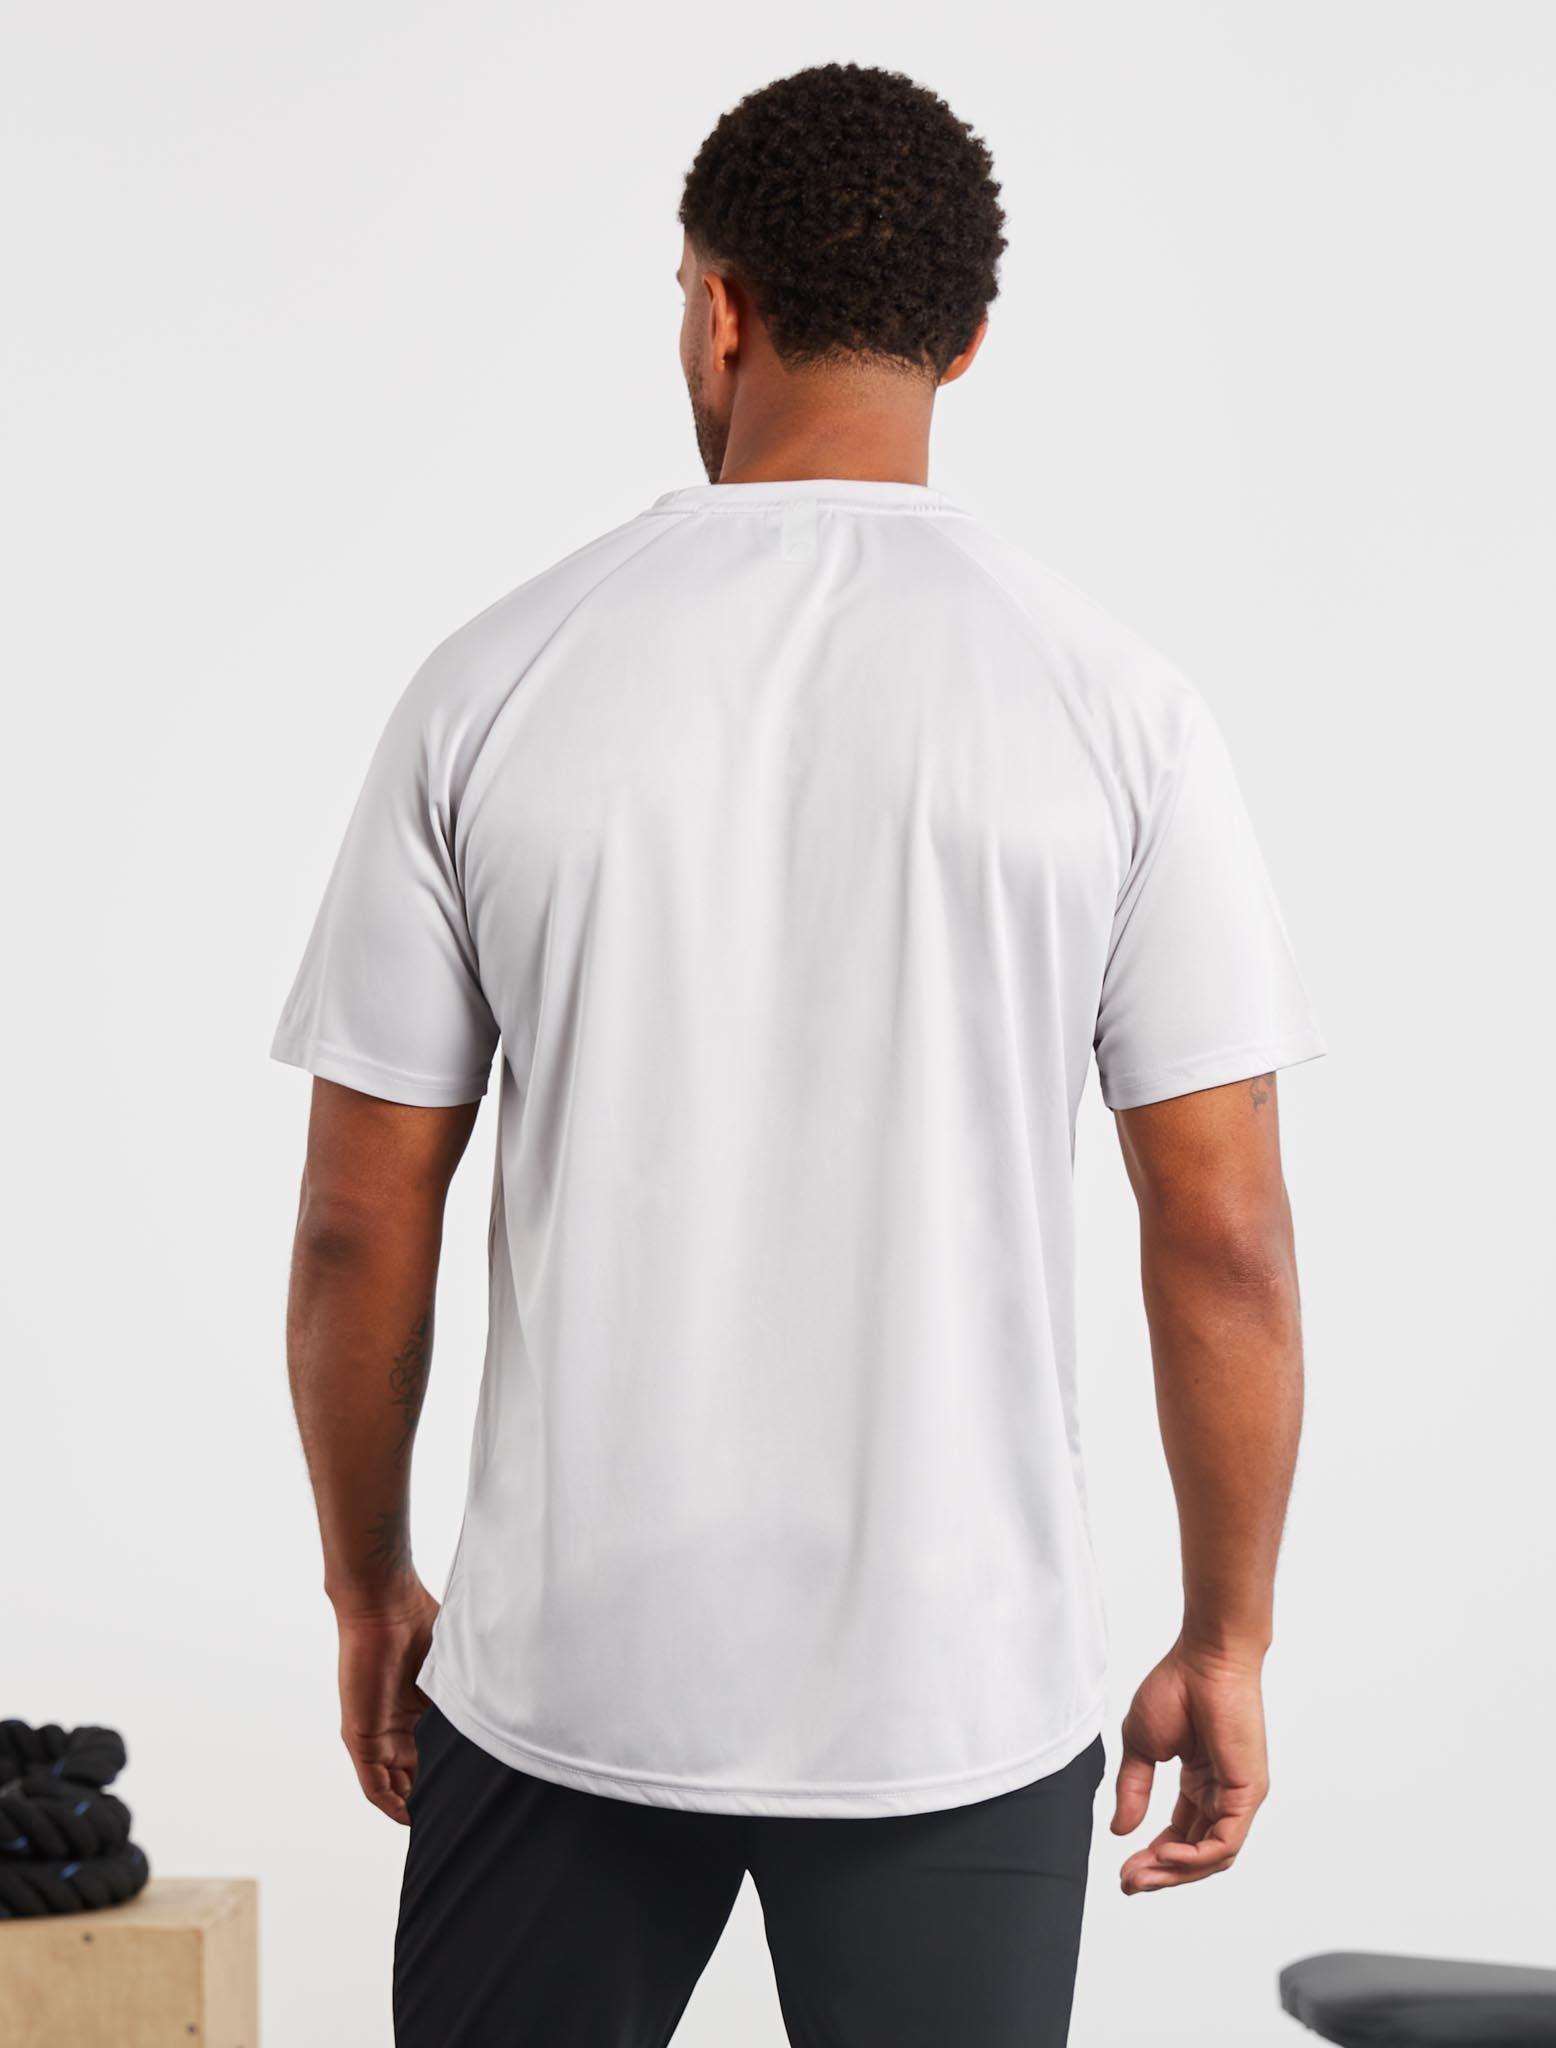 Relaxed Fit Training T-Shirt / Grey Pursue Fitness 2